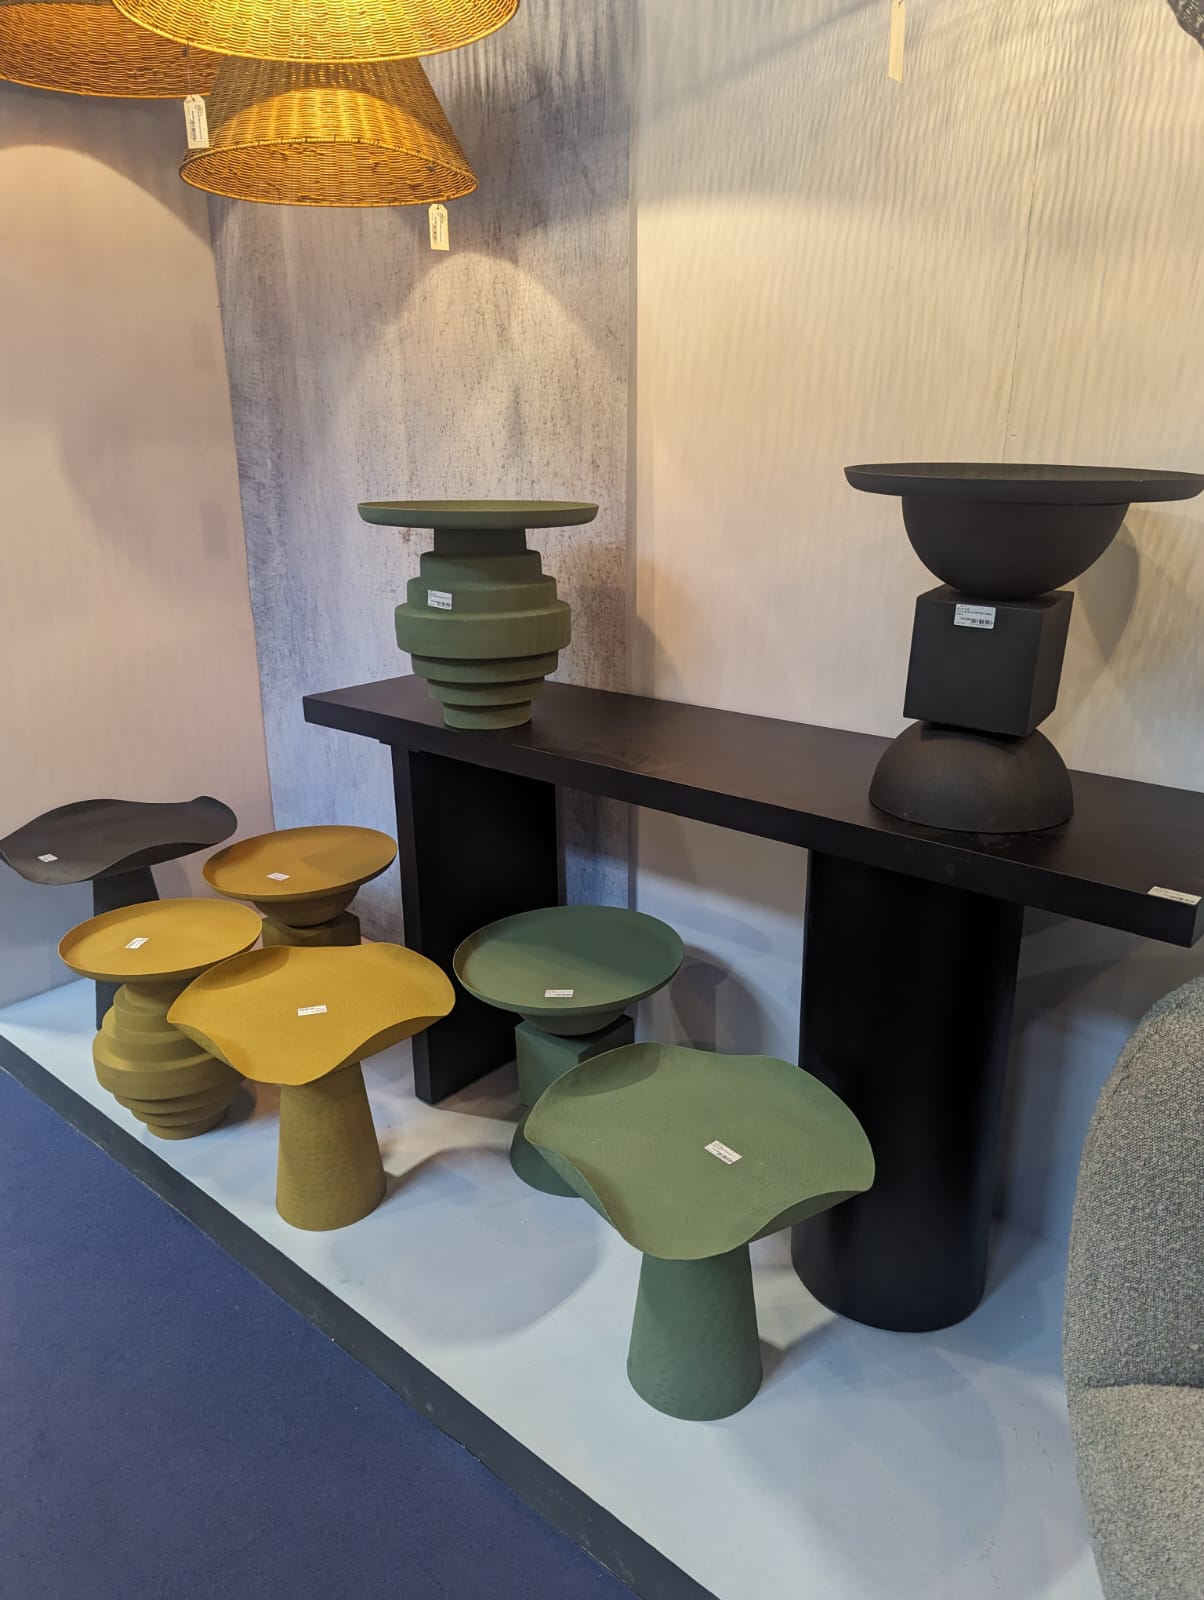 Products at Maison&Objet displaying the Totemic Structures trend